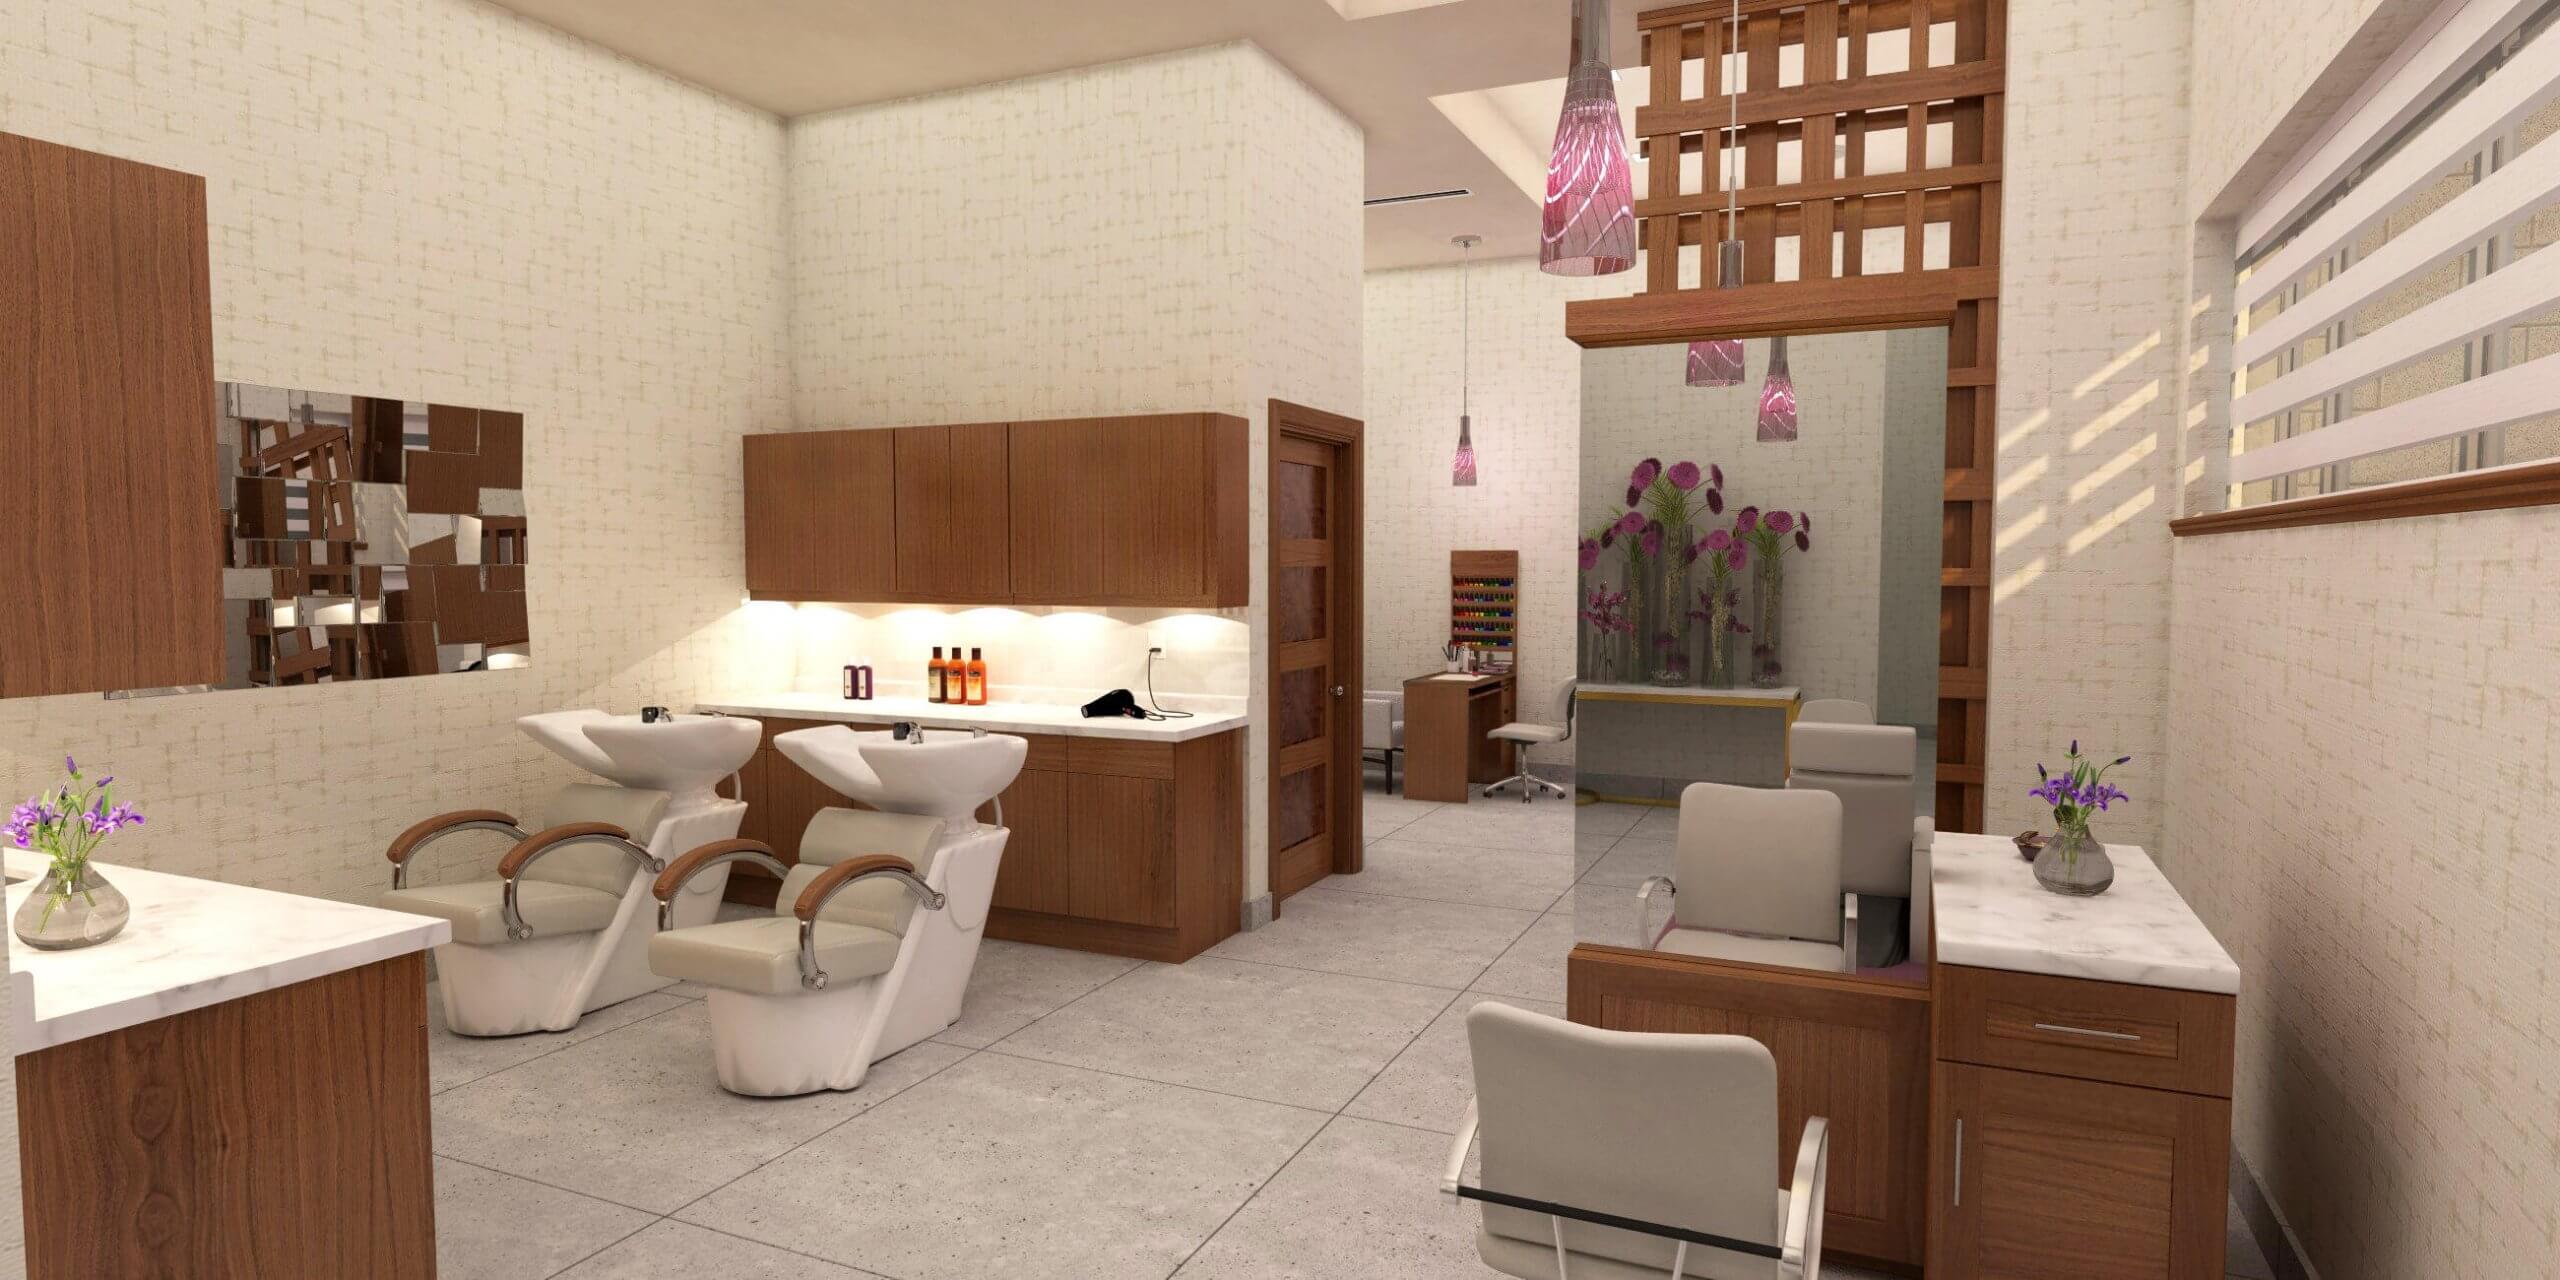 Chairs and sinks for hair salon along with stations for nail treatments.